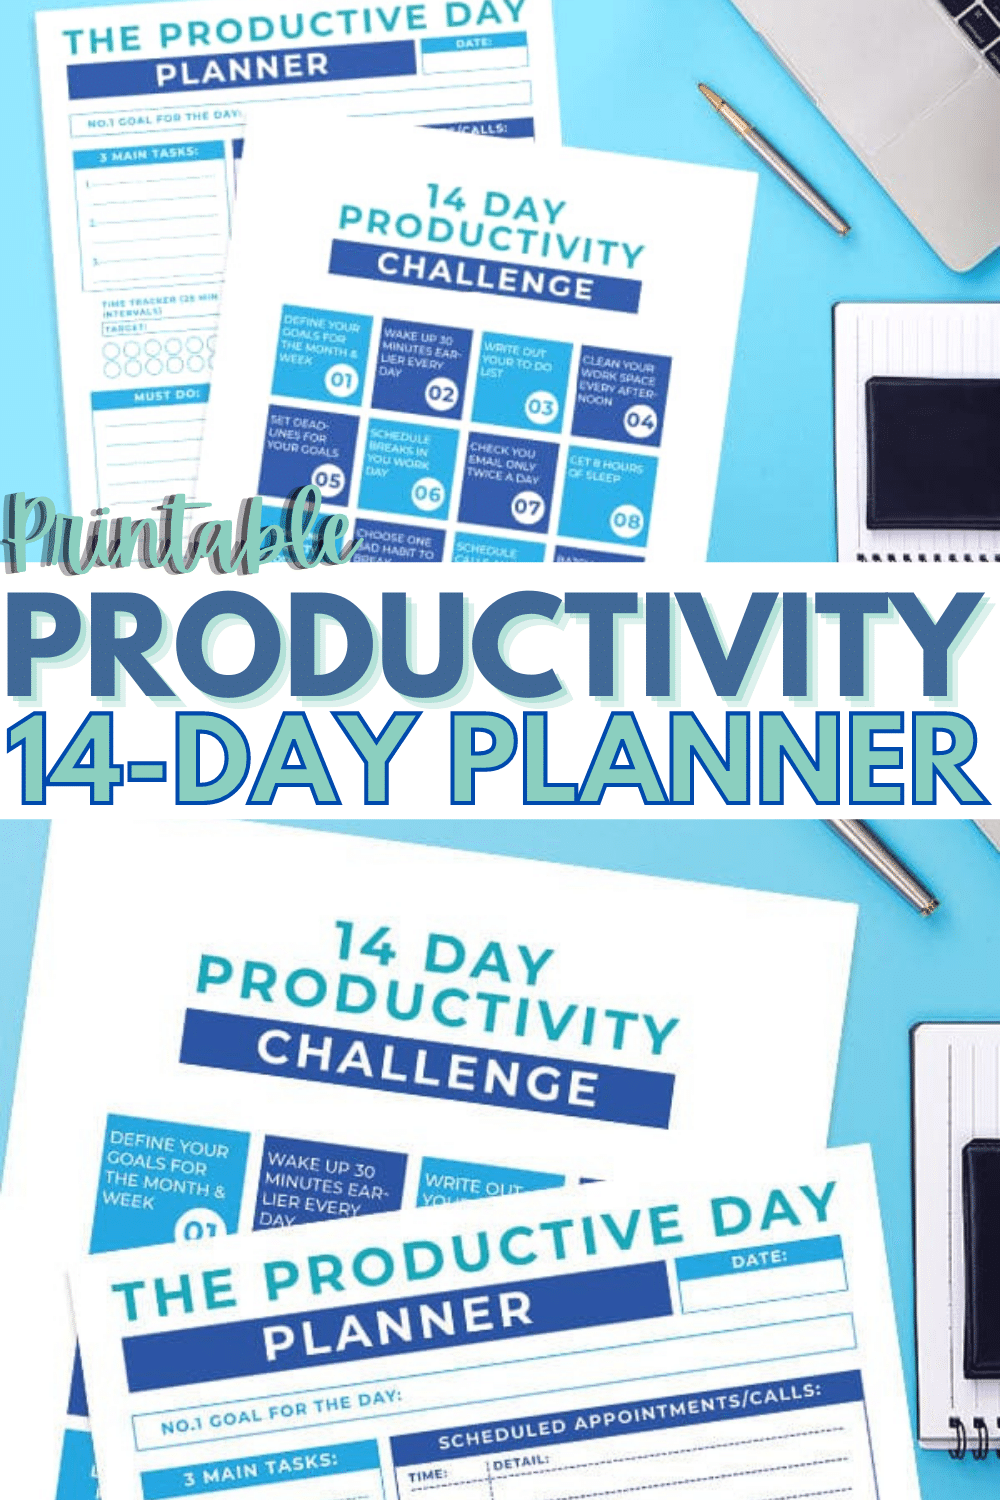 This printable productivity planner comes with a 14-day productivity challenge and a daily planner to help you accomplish more. #planner #printables #productivity via @wondermomwannab